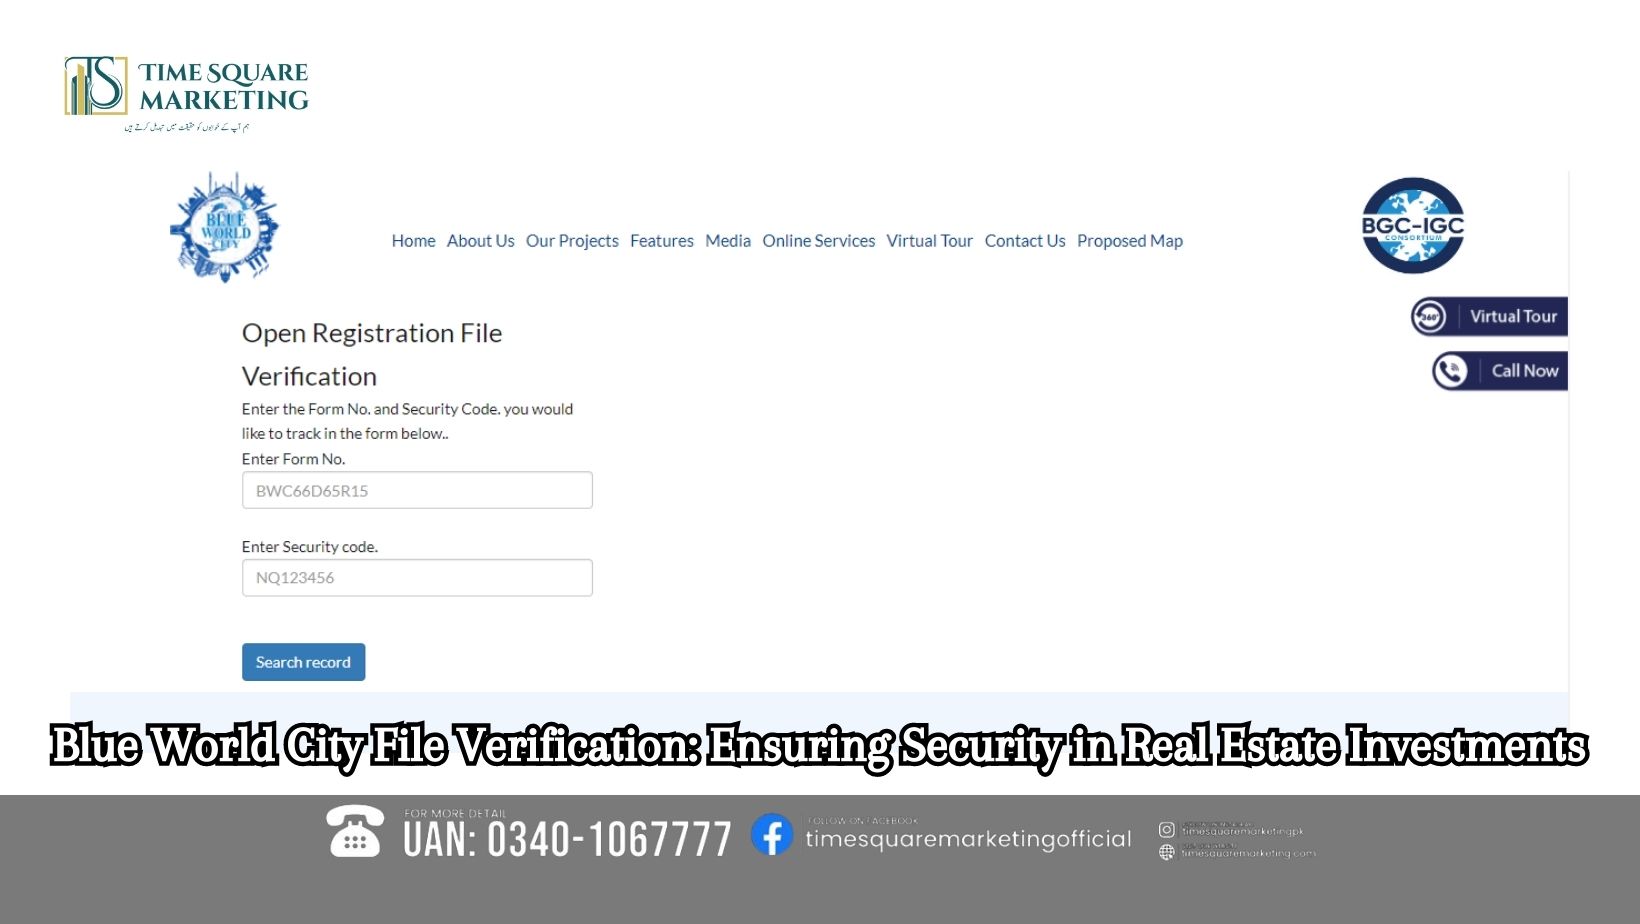 Blue World City File Verification Ensuring Security in Real Estate Investments